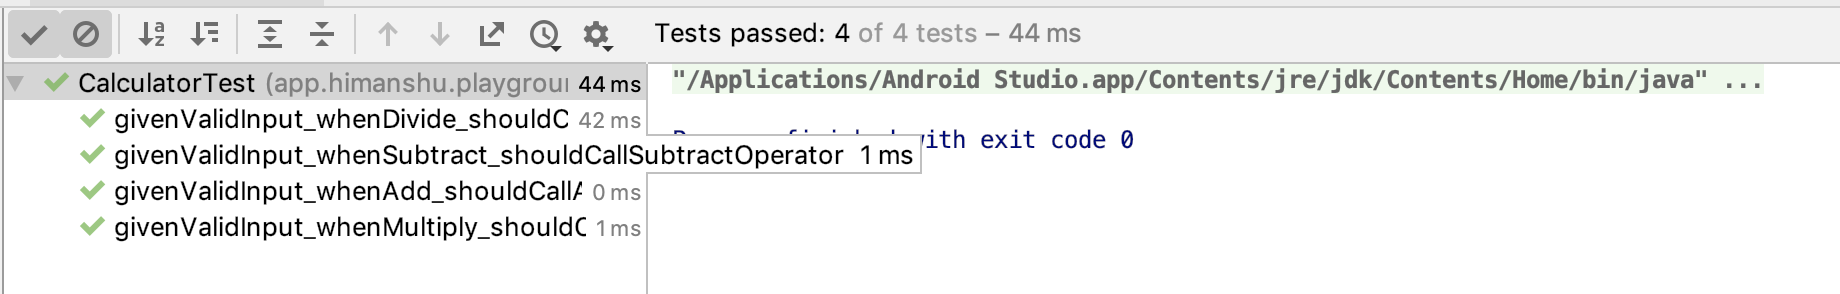 Using Mockito in Android Unit Testing as a Pro